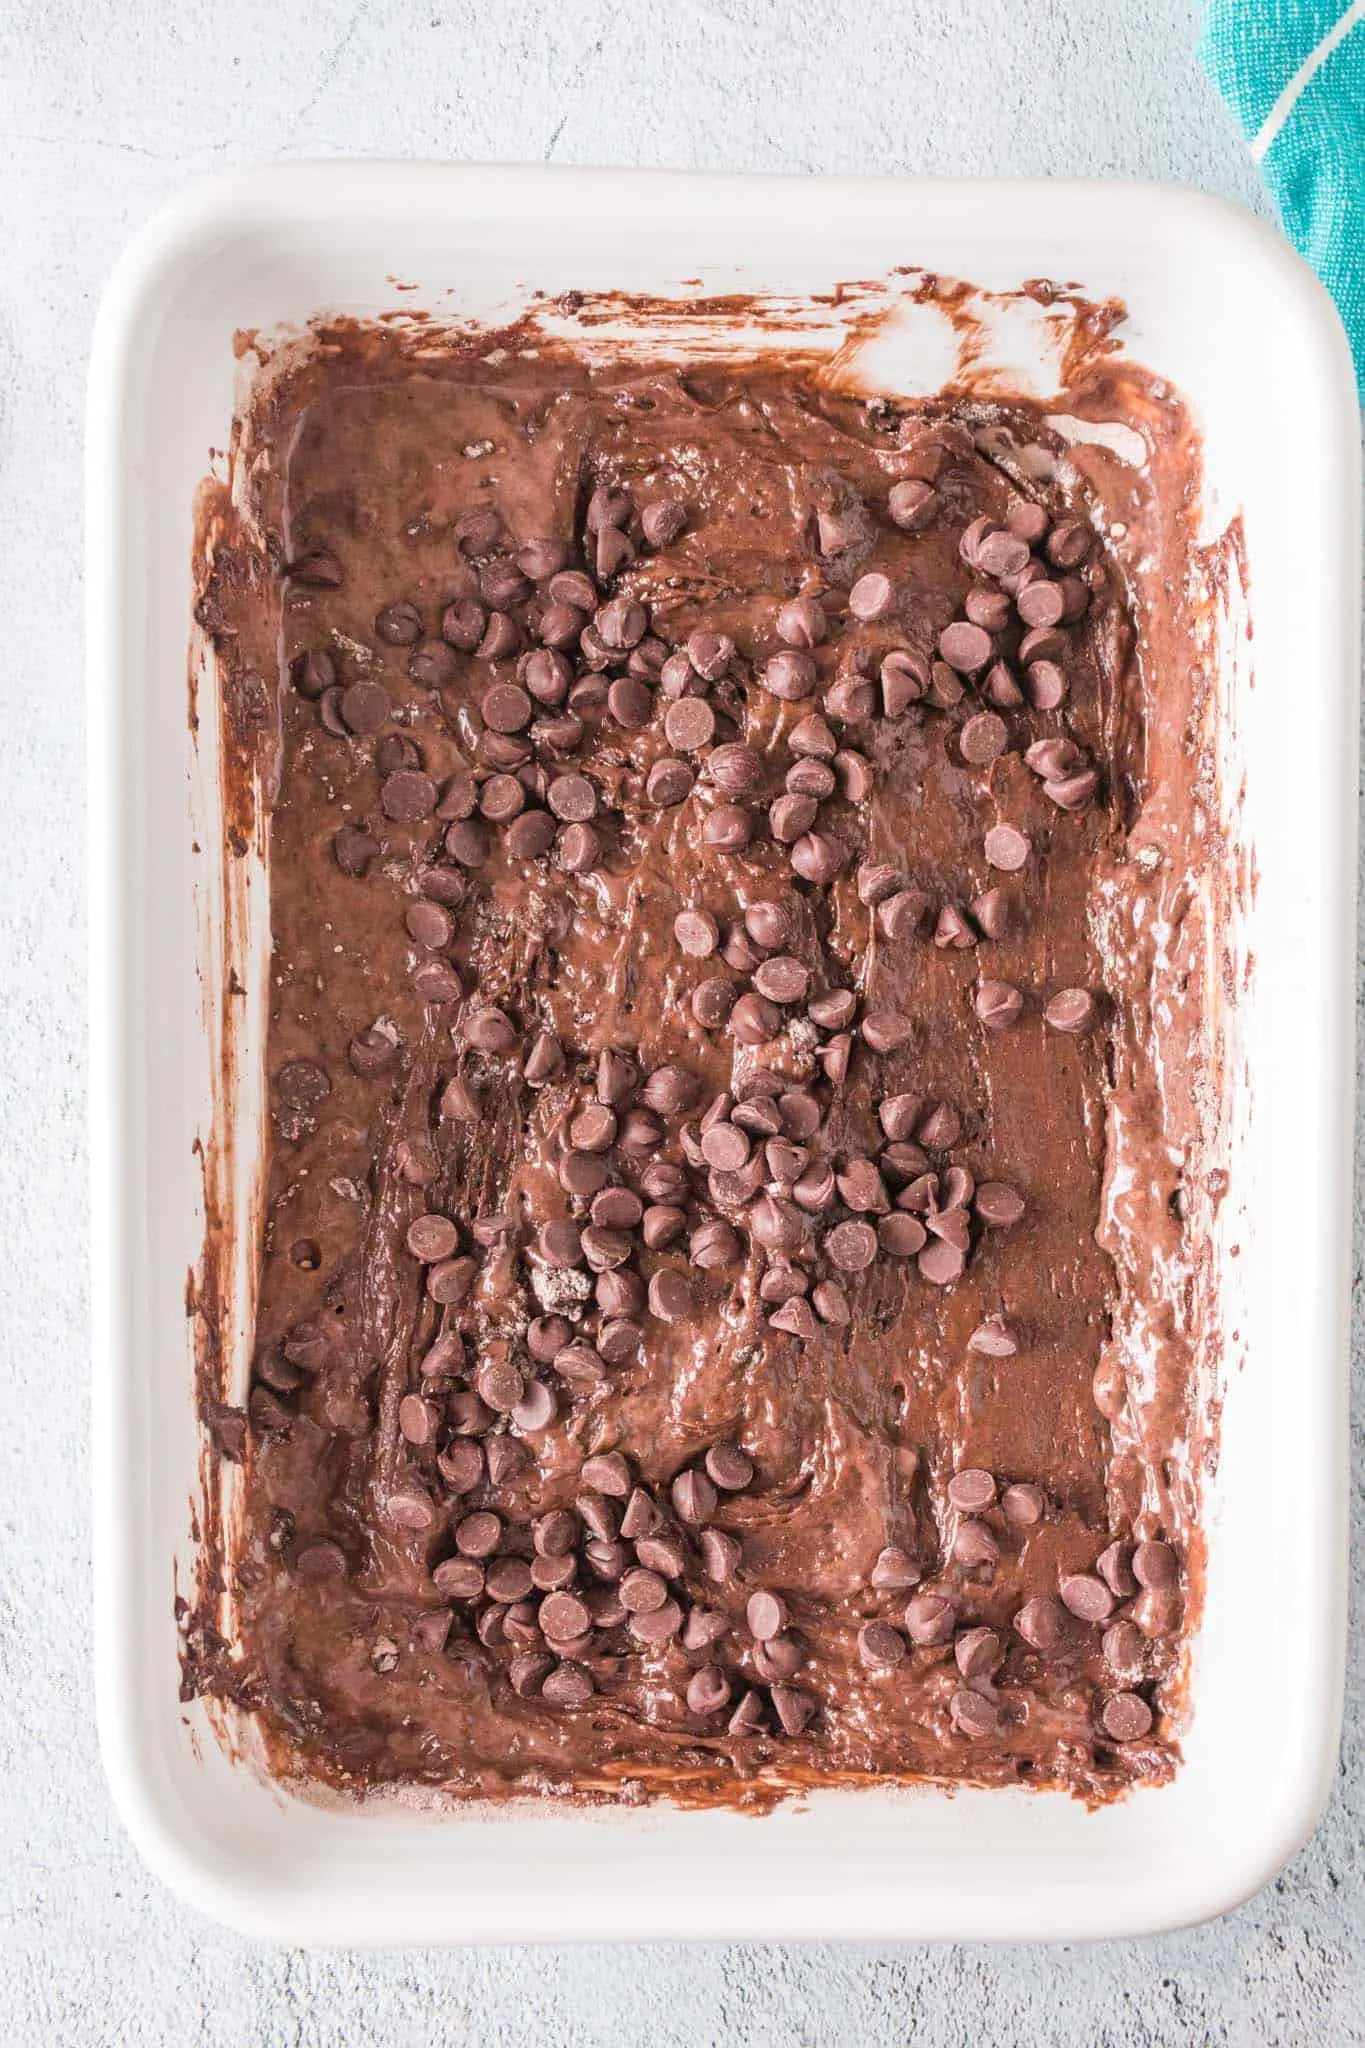 sprinkle chocolate chips on top of chocolate cake batter in a baking dish